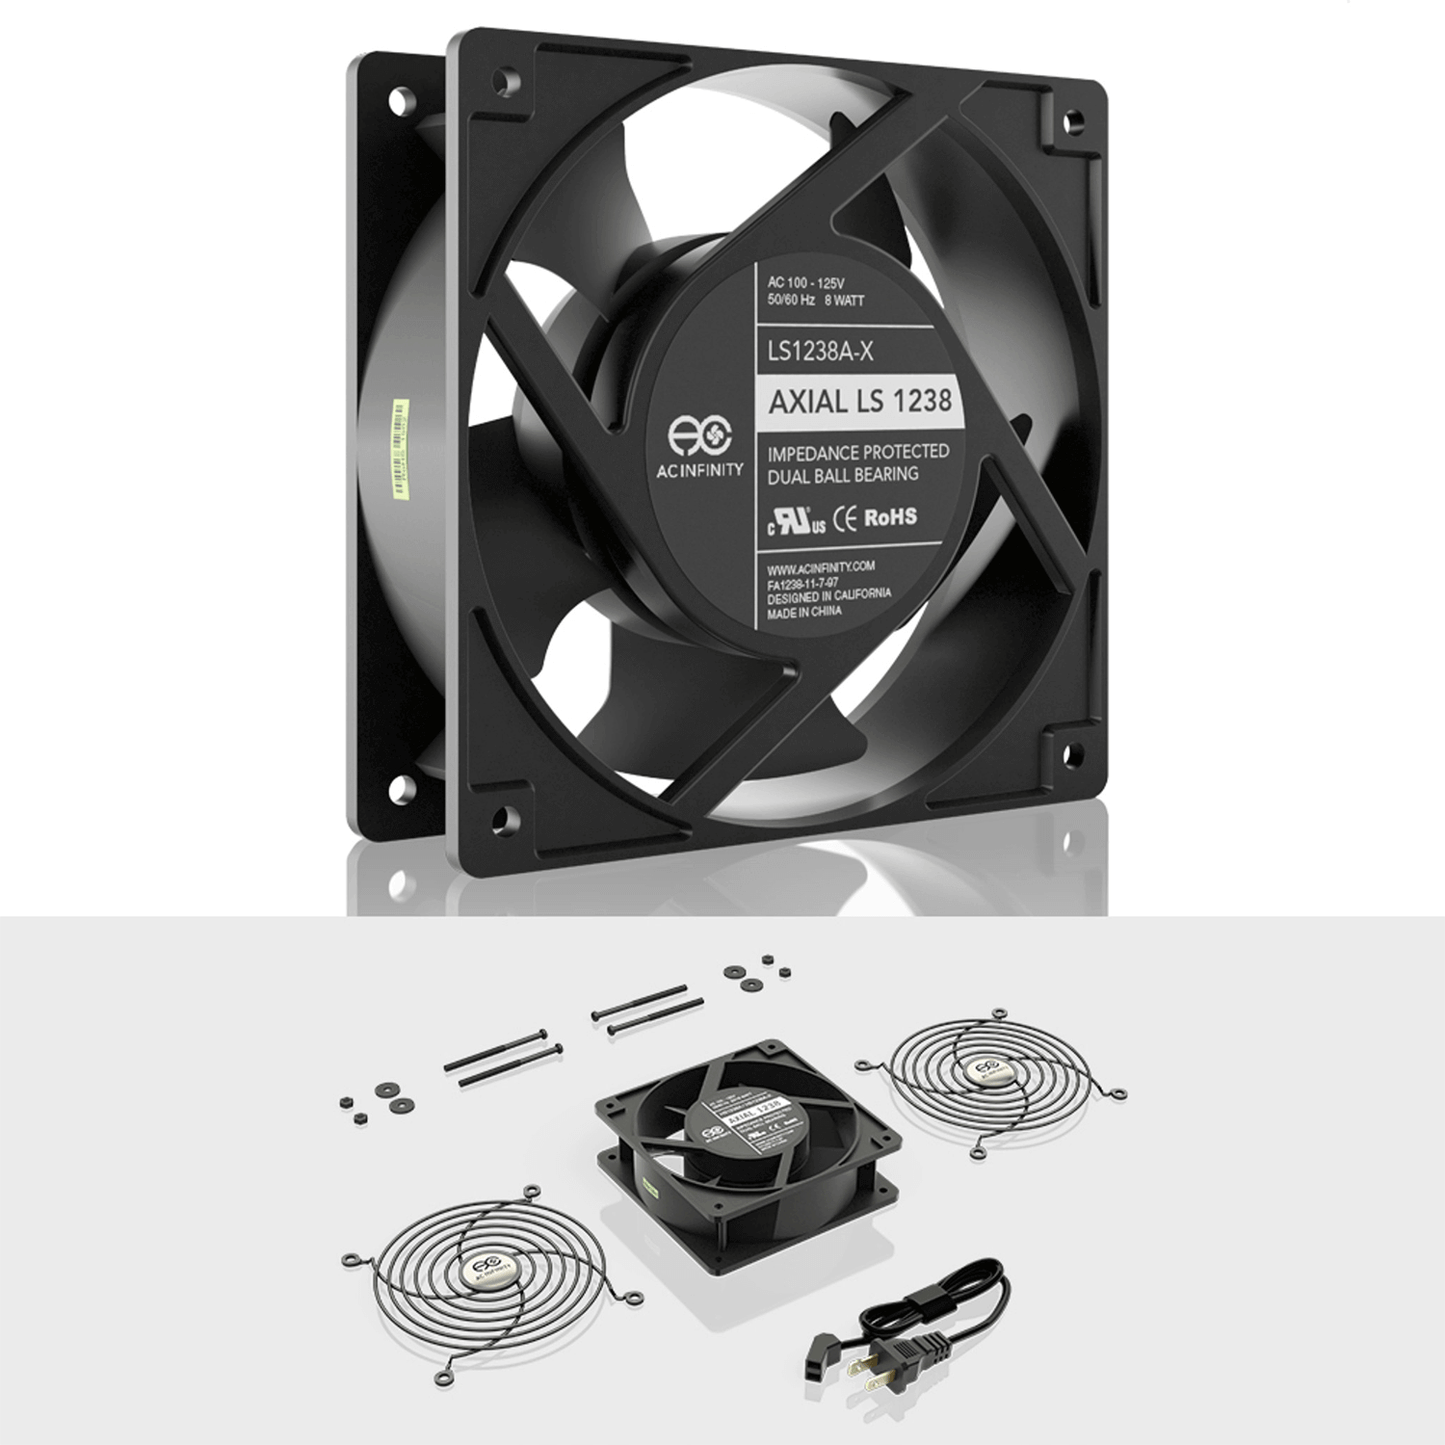 AC Infinity AXIAL LS1238, Muffin 120V AC Cooling Fan, 120mm x 120mm x 38mm, Low Speed | LS1238A-X | Grow Tents Depot | Climate Control | 819137020542